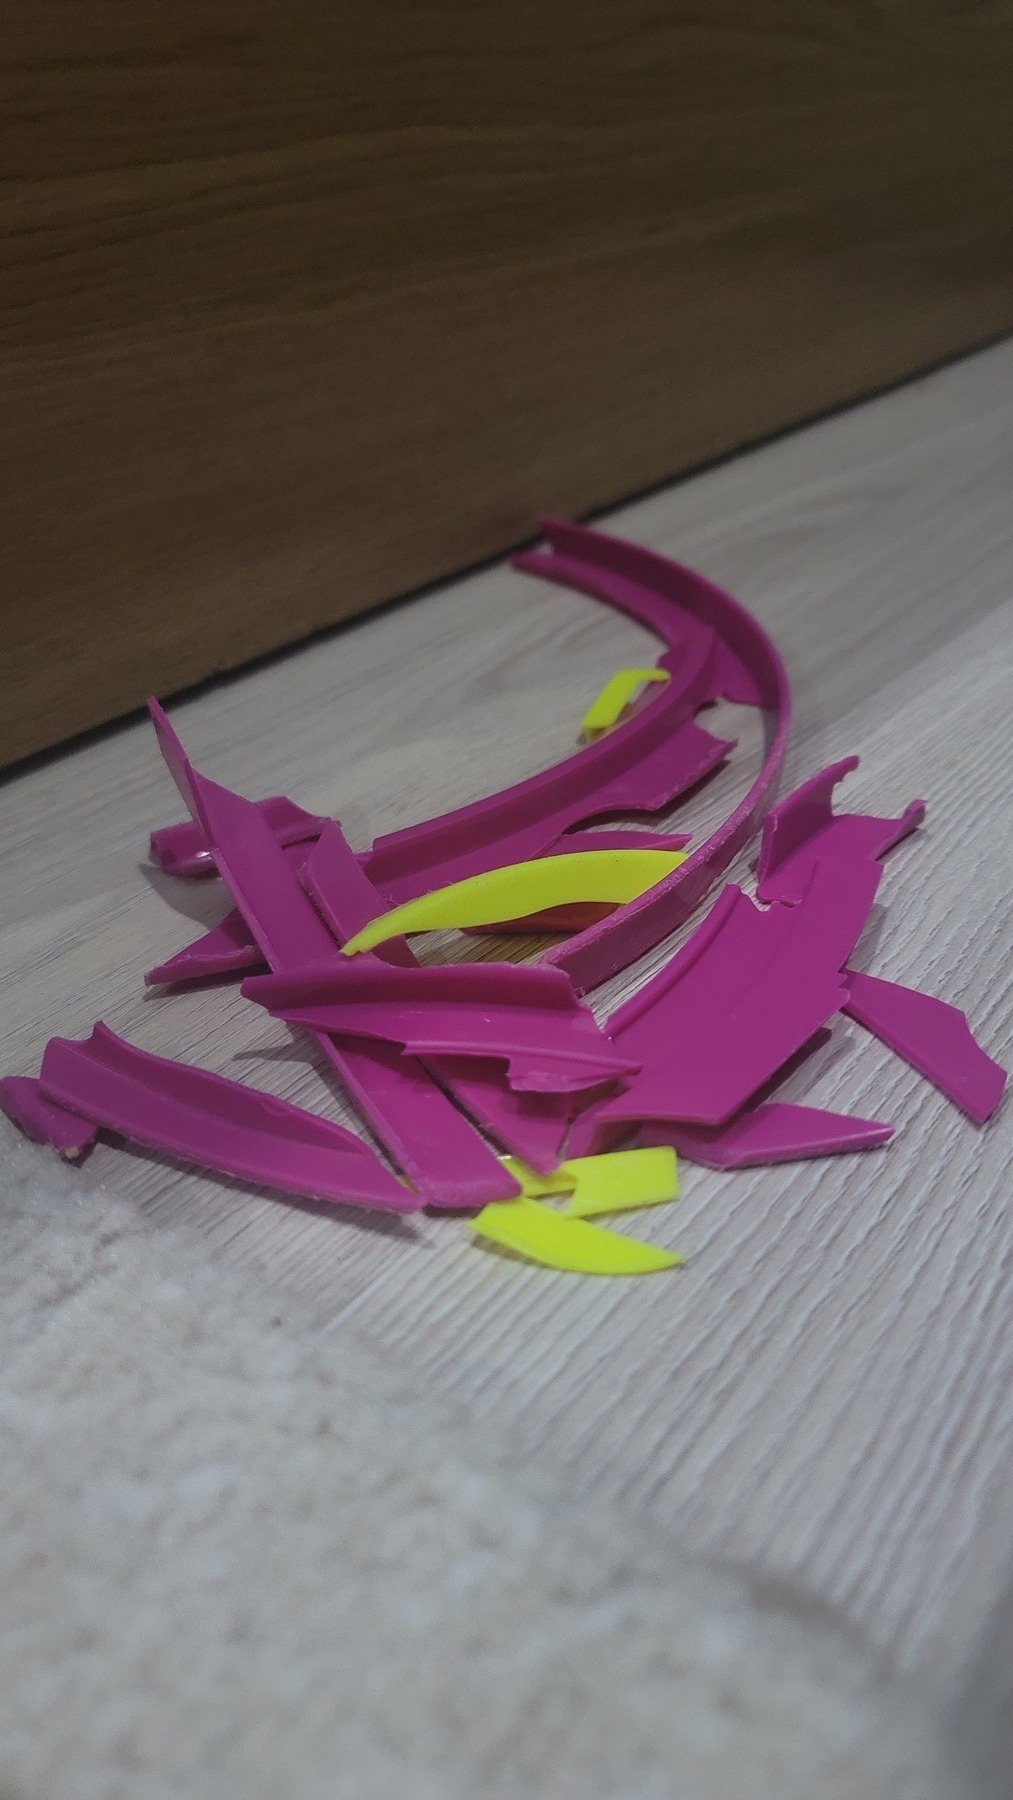 about 7 rounded, pink and 4 rounded, yellow plastic pieces in a pile on the floor